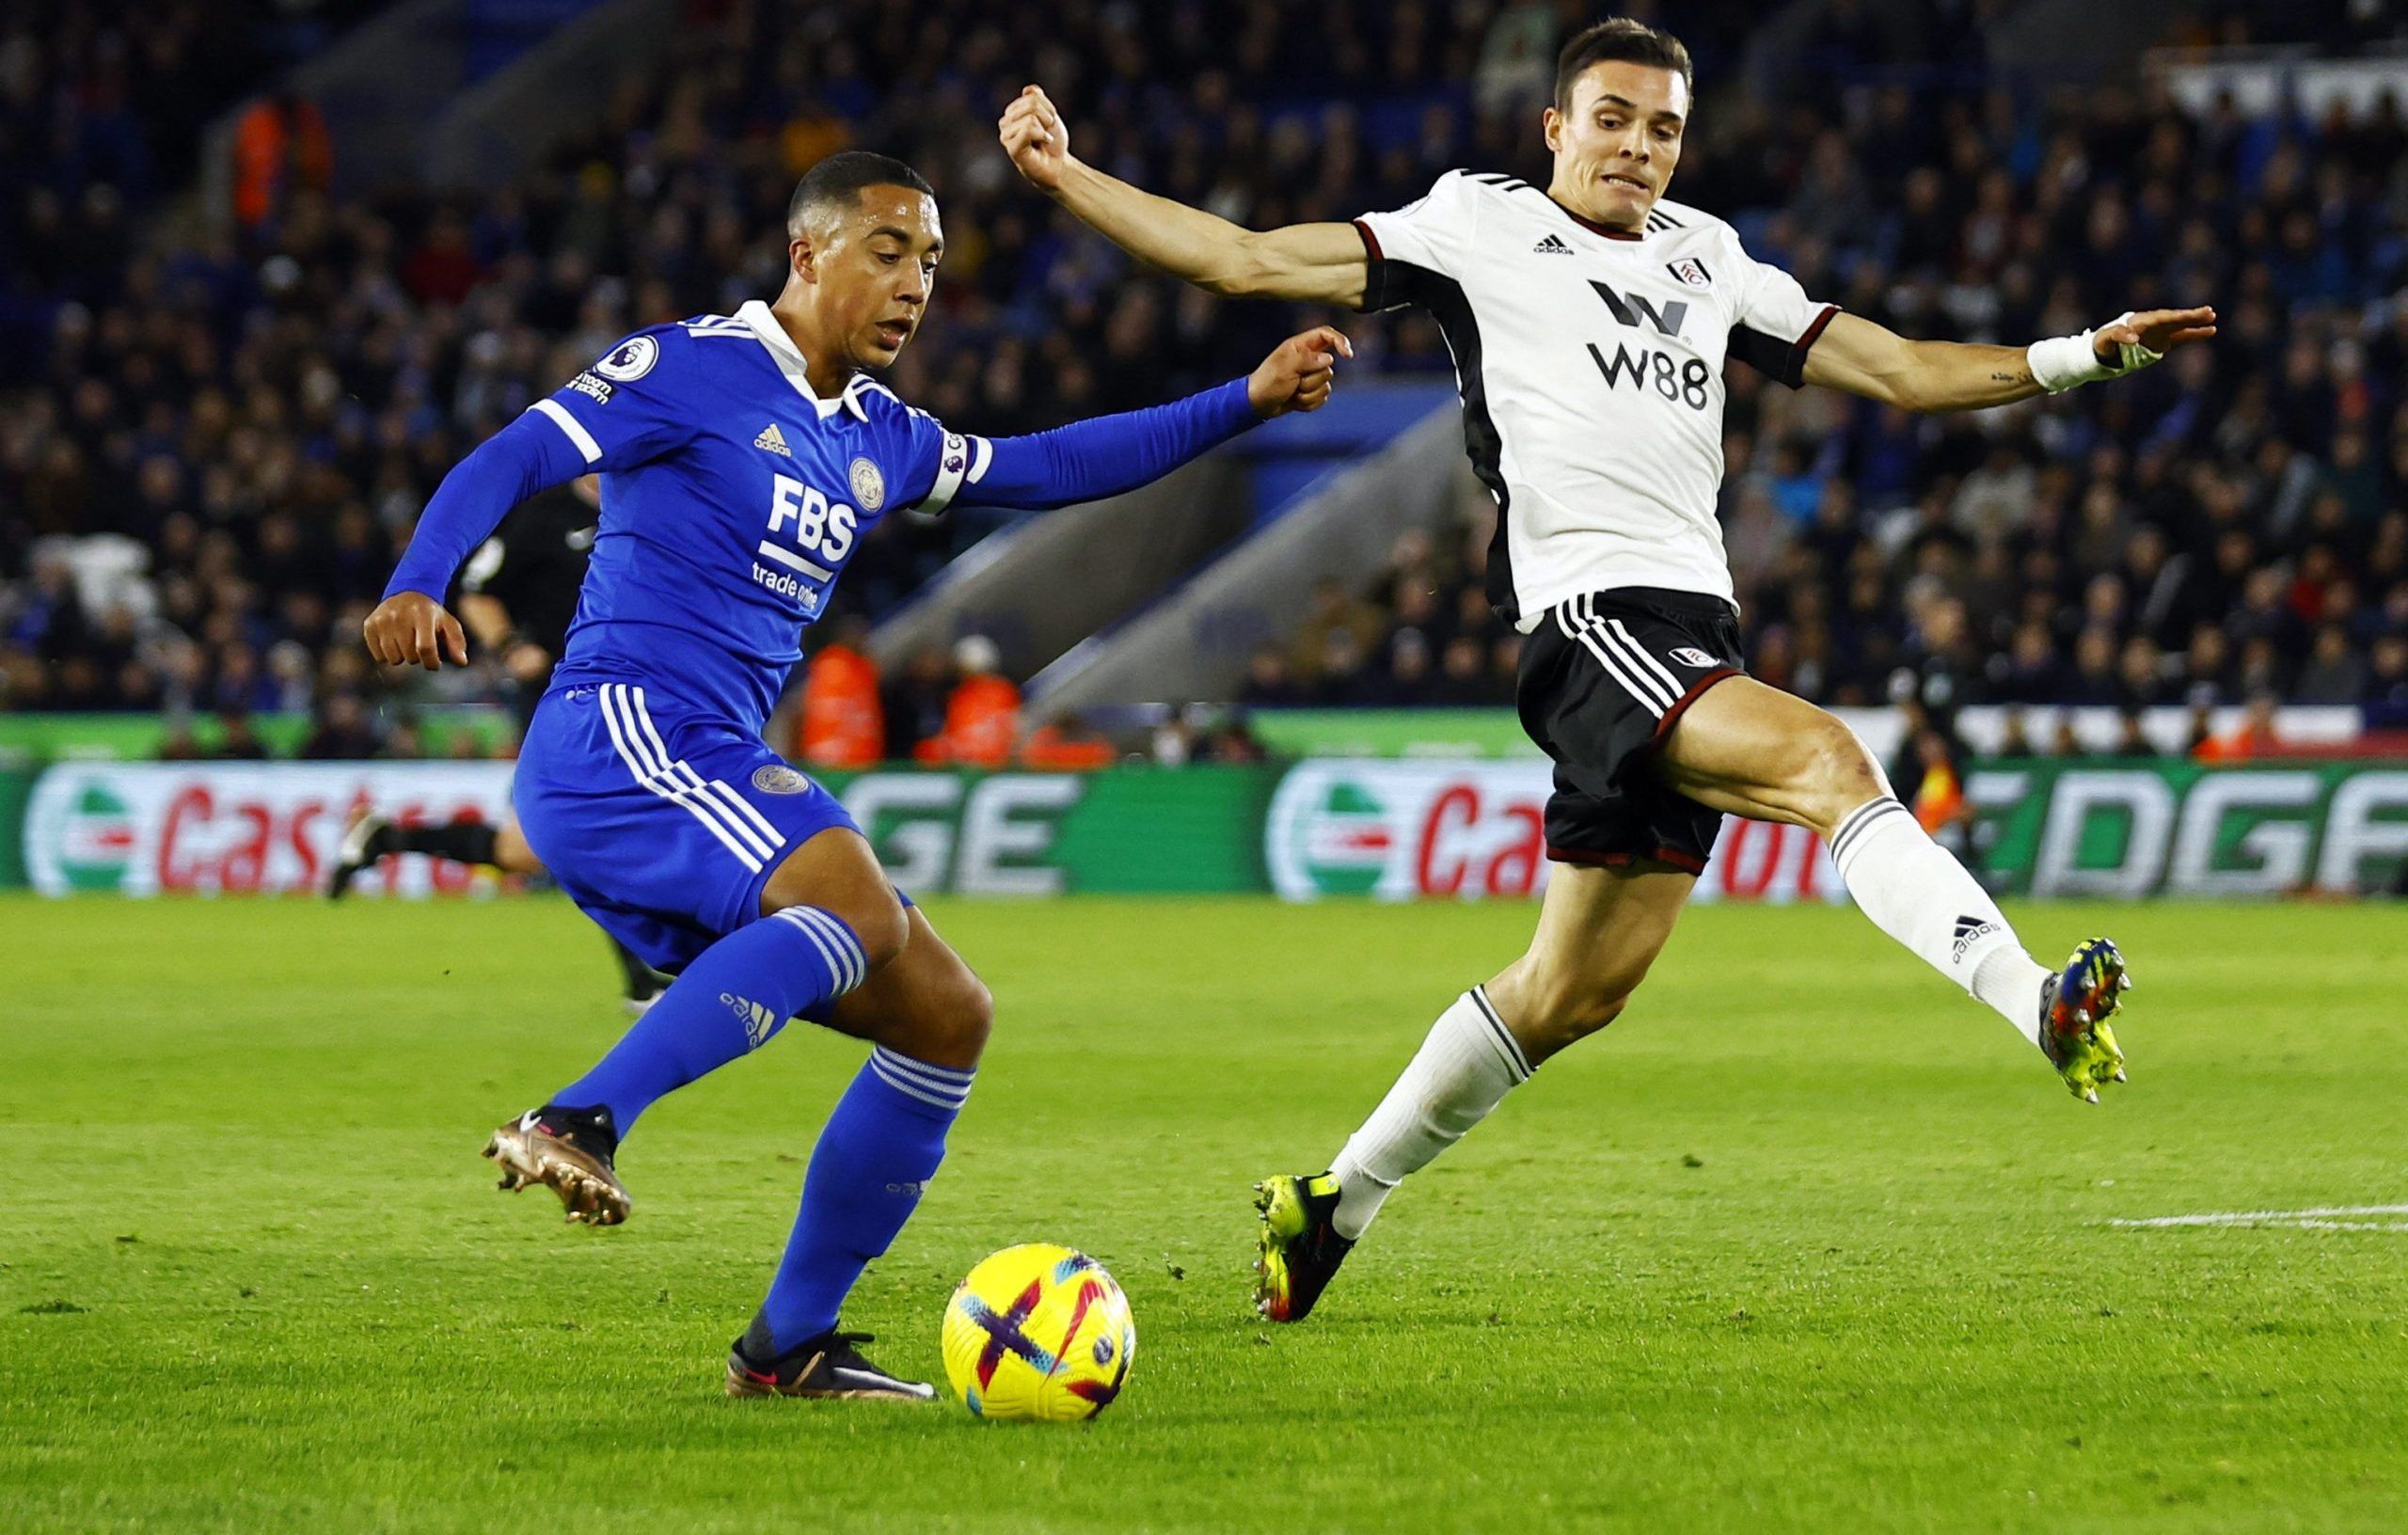 Soccer Football - Premier League - Leicester City v Fulham - King Power Stadium, Leicester, Britain - January 3, 2023 Leicester City's Youri Tielemans in action with Fulham's Joao Palhinha Action Images via Reuters/Andrew Boyers EDITORIAL USE ONLY. No use with unauthorized audio, video, data, fixture lists, club/league logos or 'live' services. Online in-match use limited to 75 images, no video emulation. No use in betting, games or single club /league/player publications.  Please contact your a